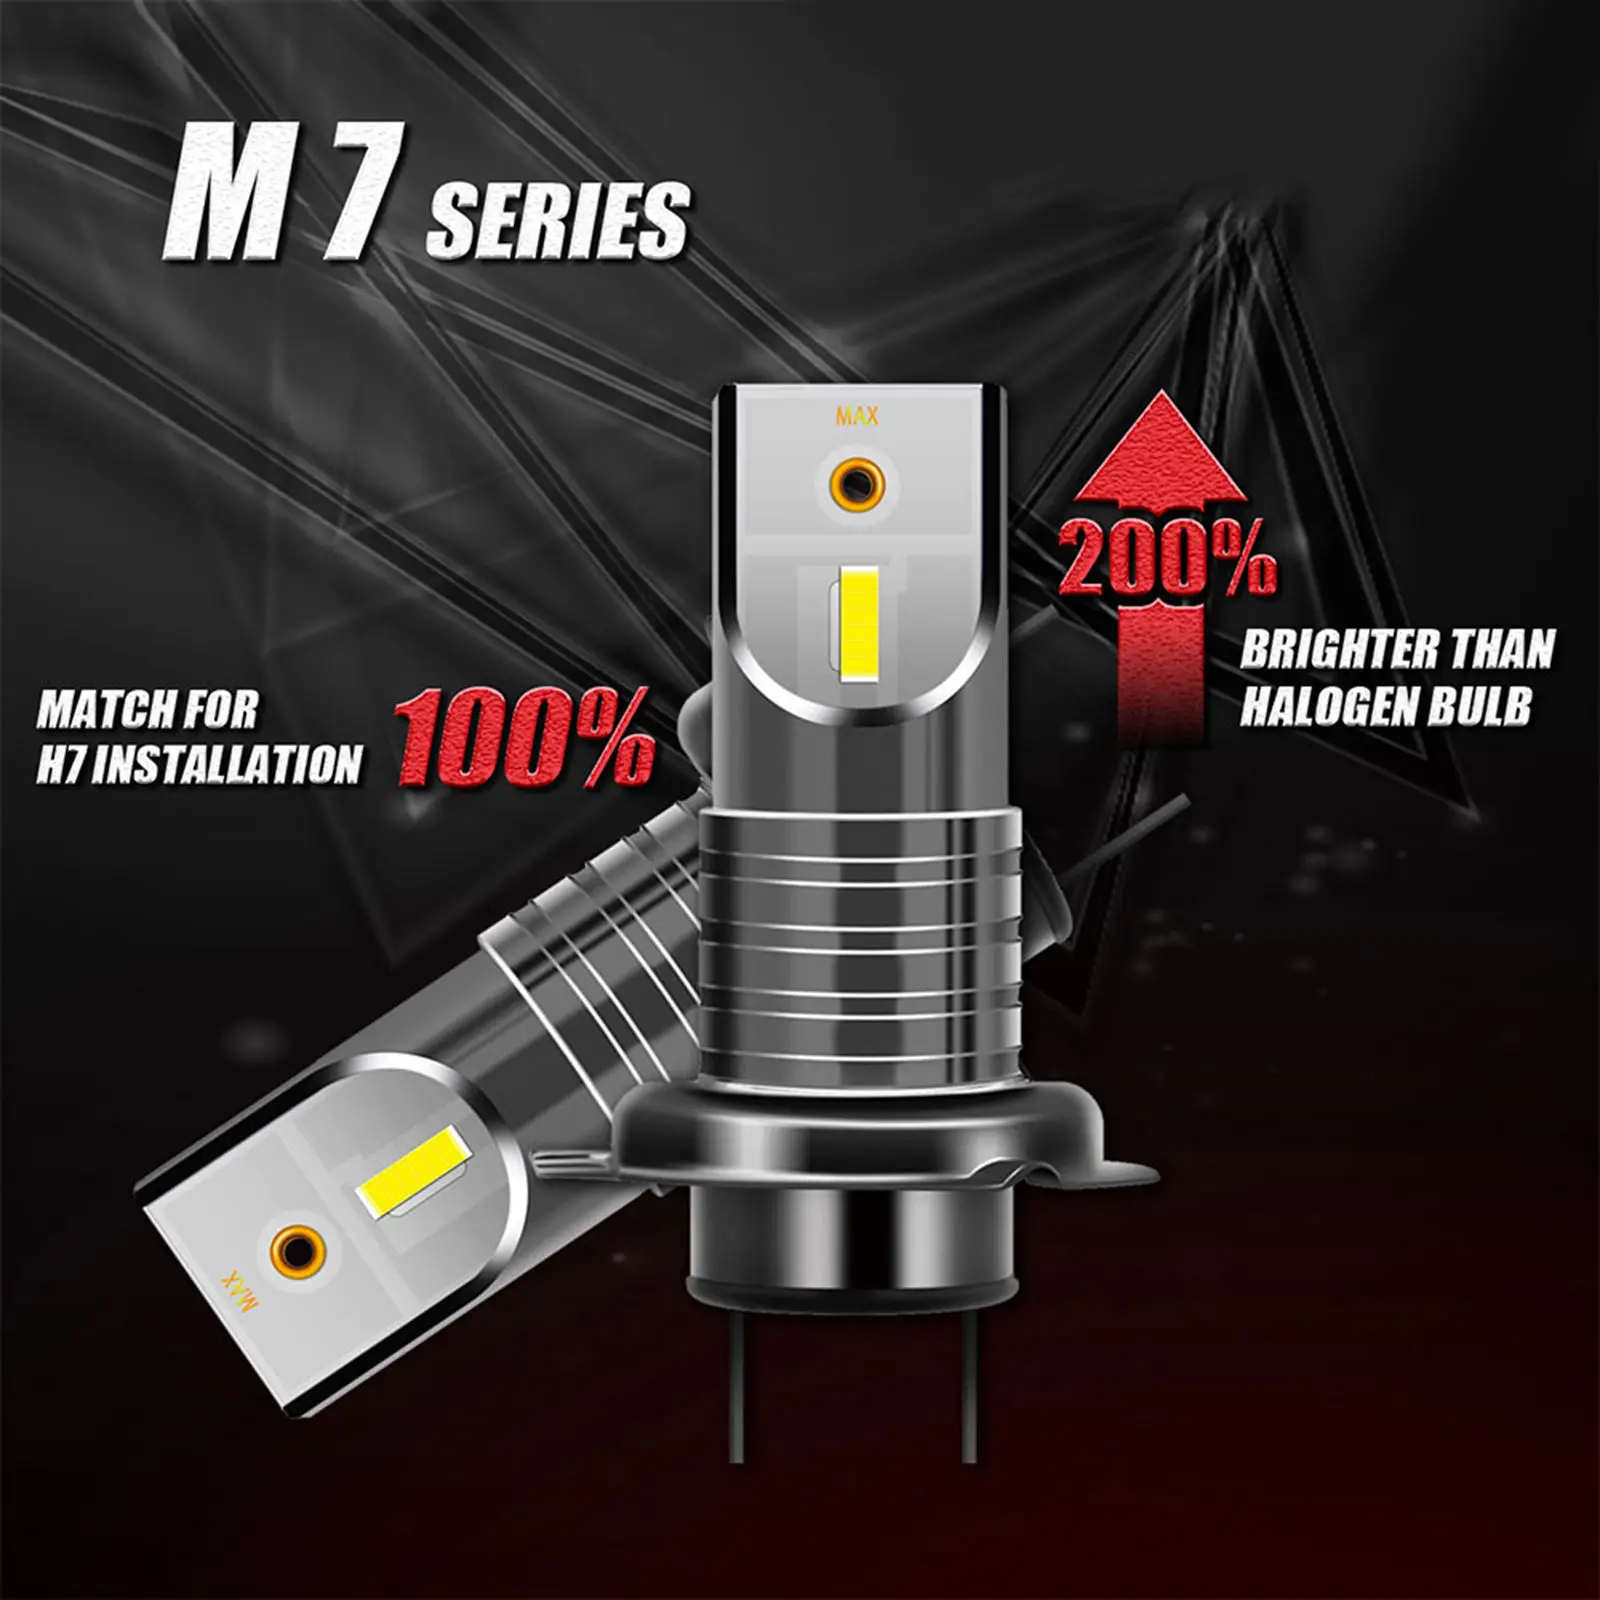 2 Pack H7 LED Headlight Bulbs 55W 6500K Bright LED Headlight Conversion Kit Car Halogen Lights Replacement Car Accessories